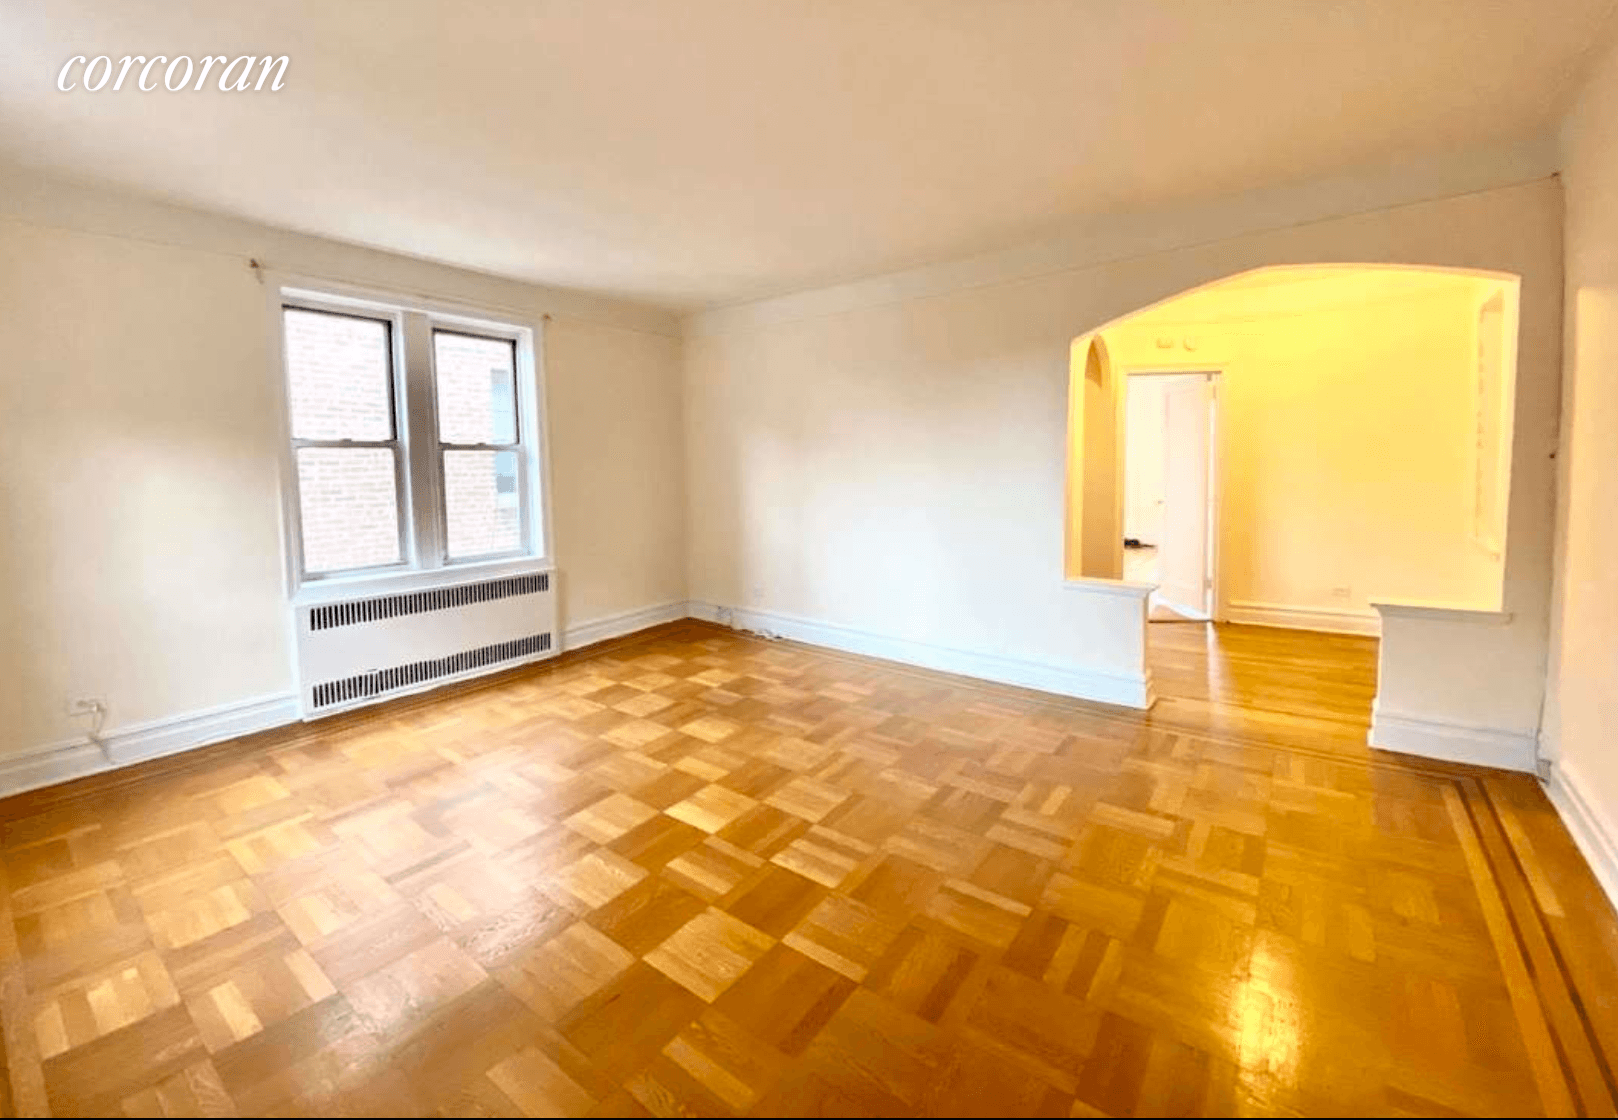 Amazing One bedroom apartment, in a really nice elevator building, very spacious, nice location.